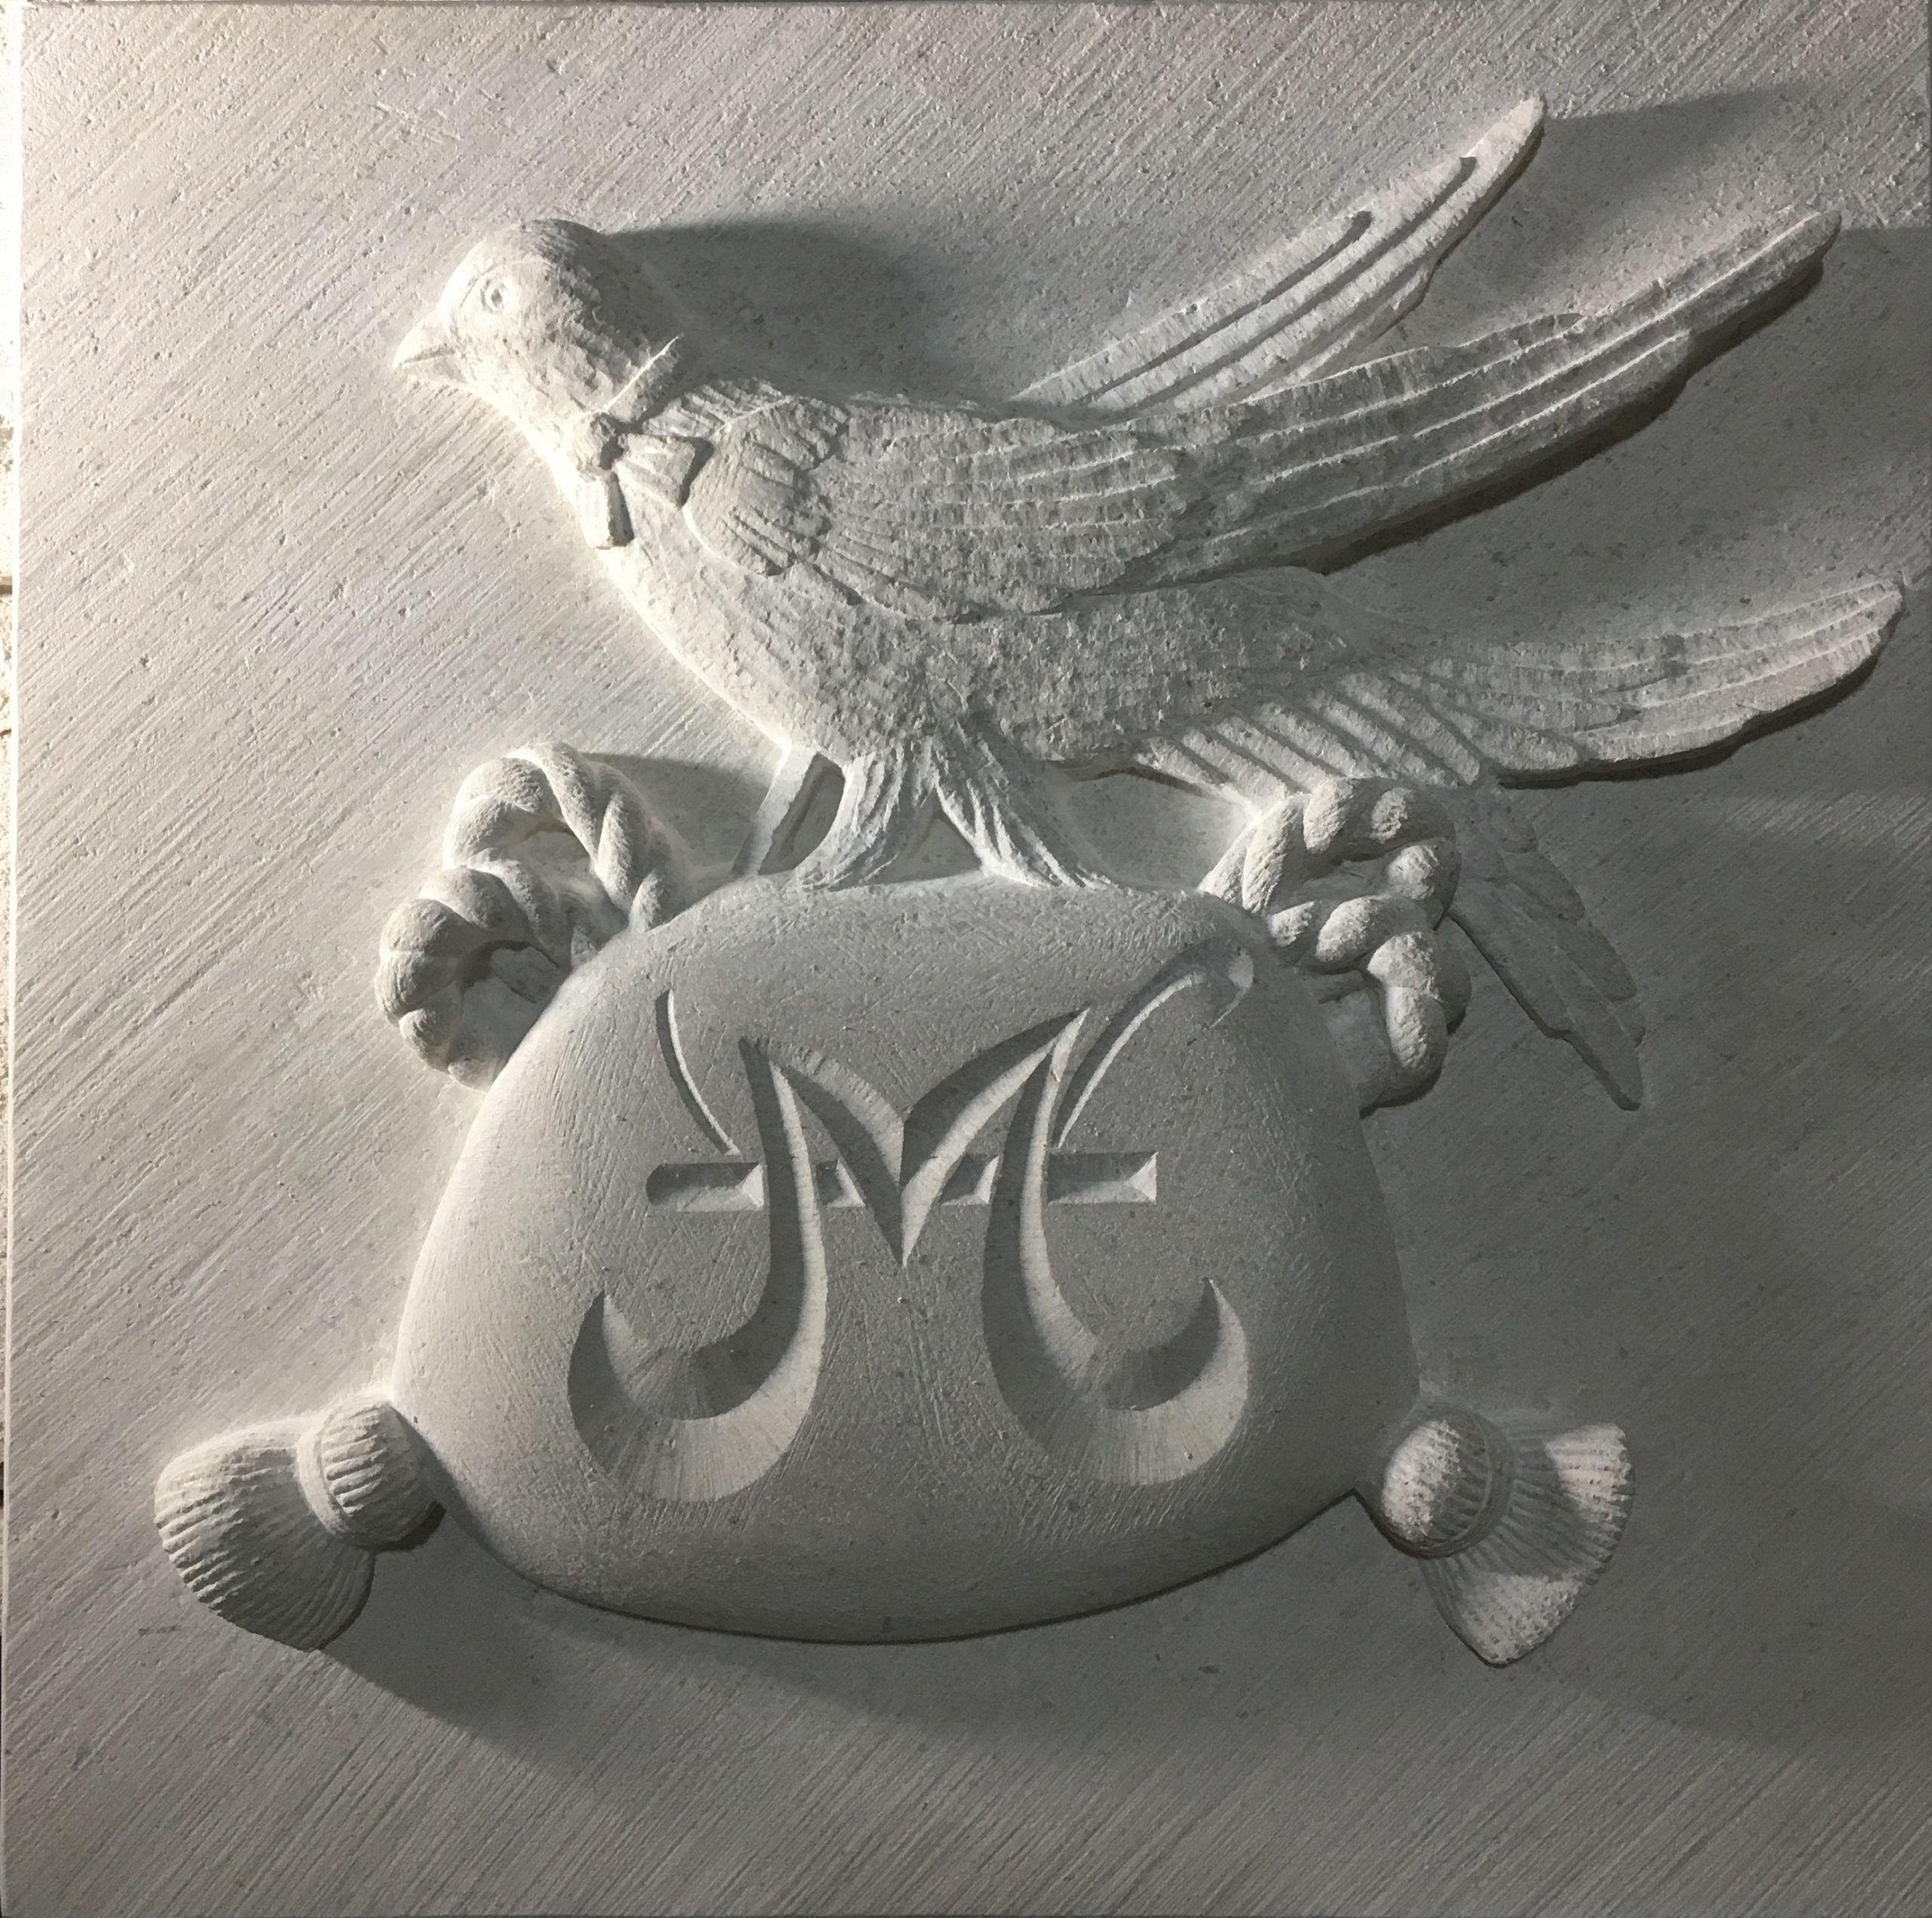 Family crest of a Martlet on top of a purse carved in stone